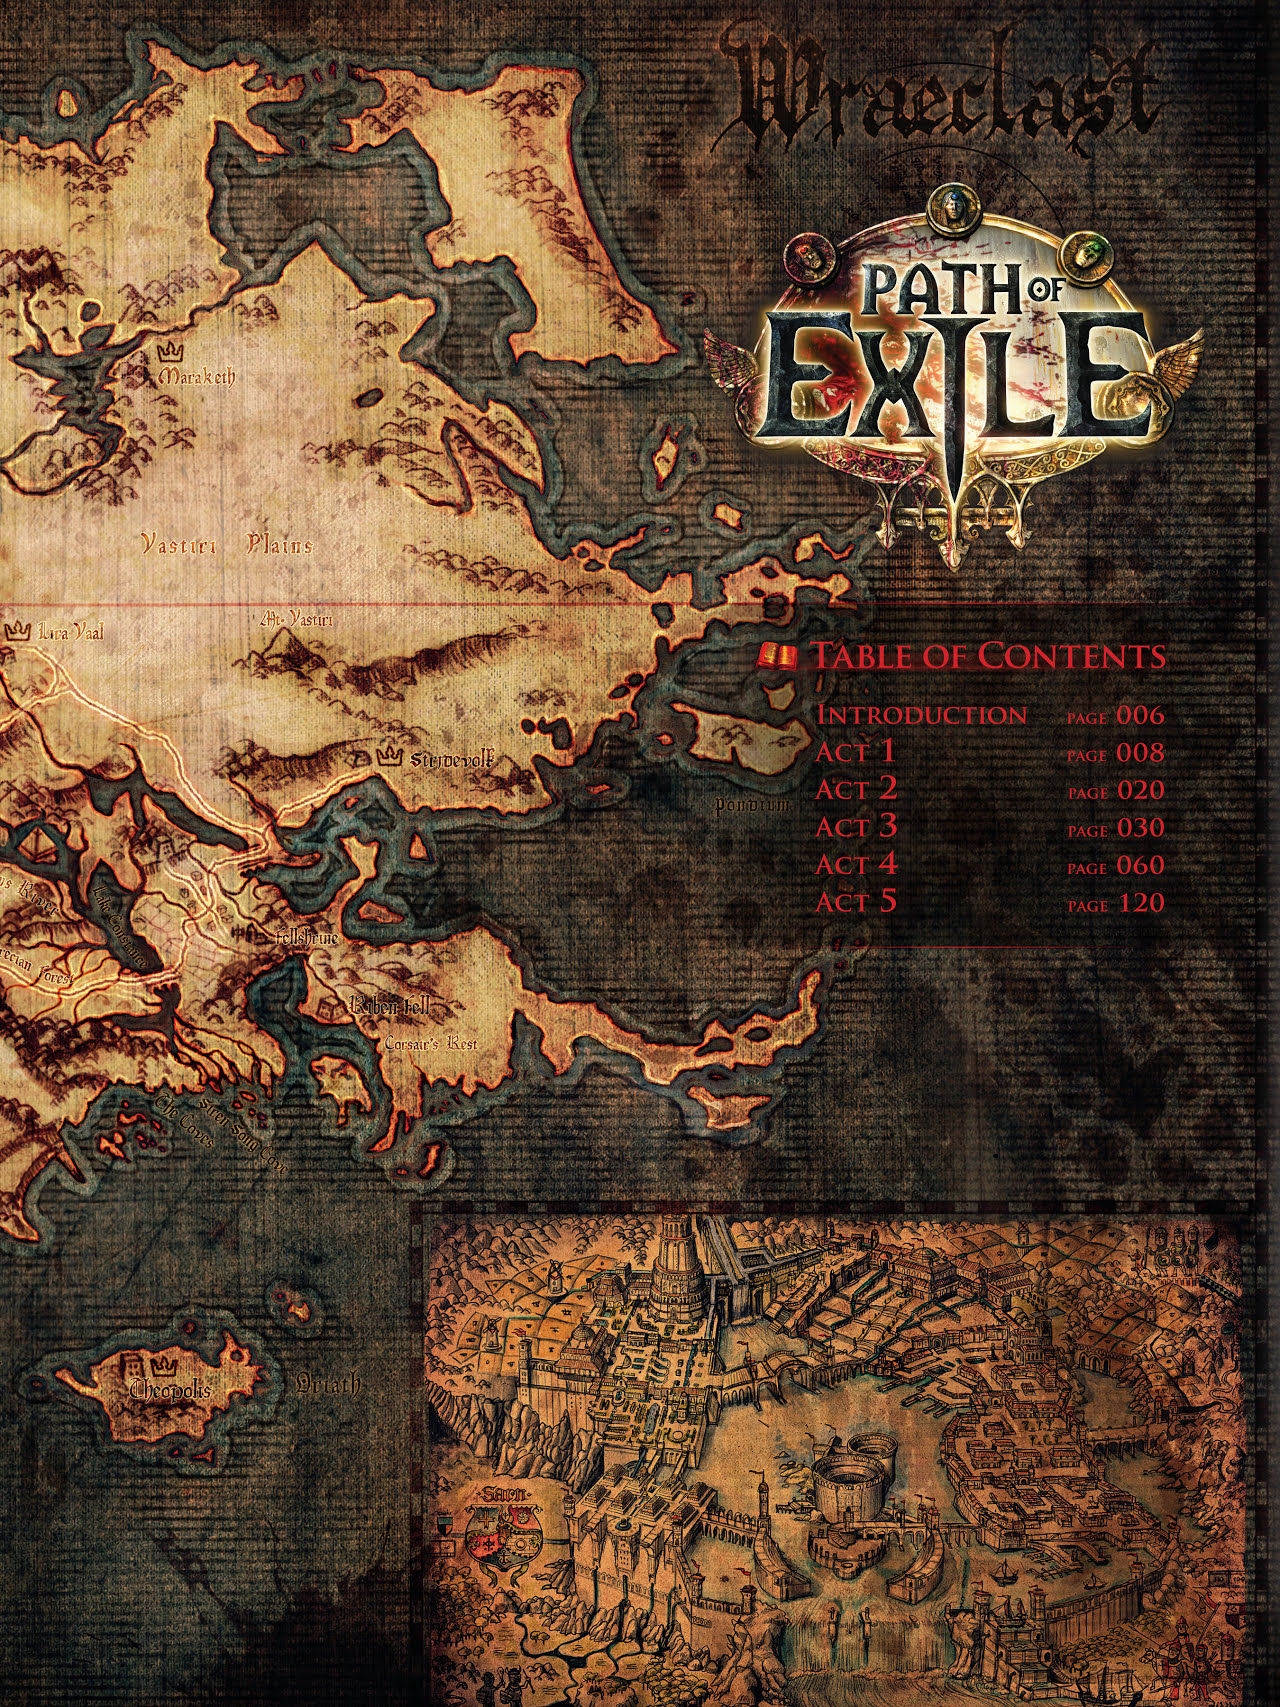 The Art of Path of Exile 4